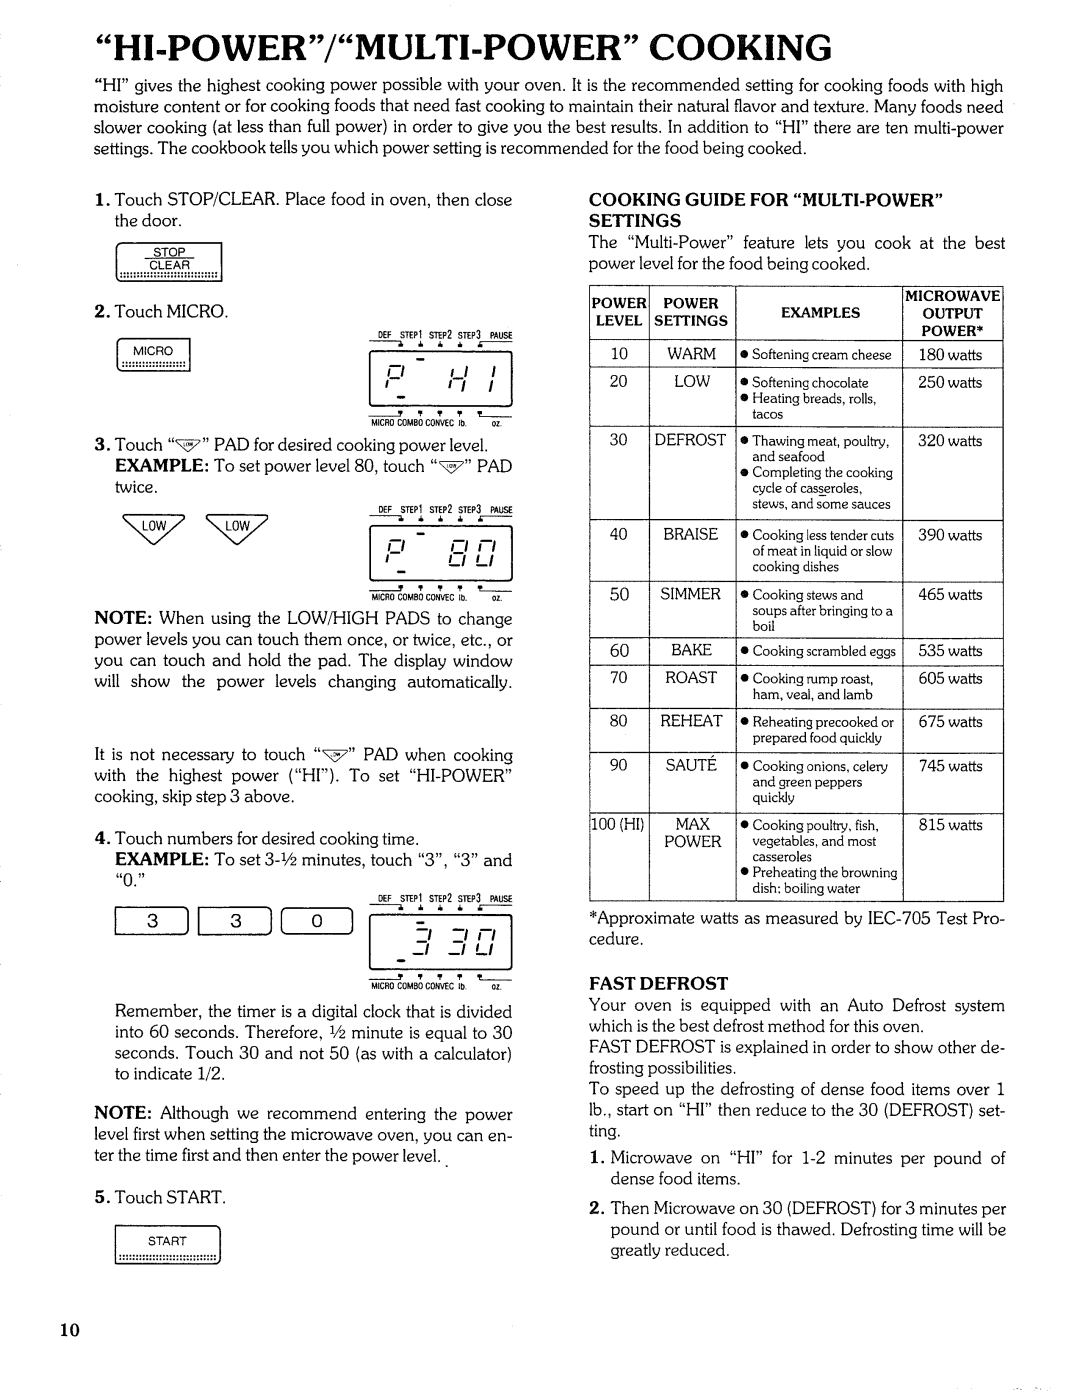 Sears Microwave Oven manual Hi-Power/Multi-Powercooking, Approximate watts as measured by IEC-705Test Pro, Fast Defrost 